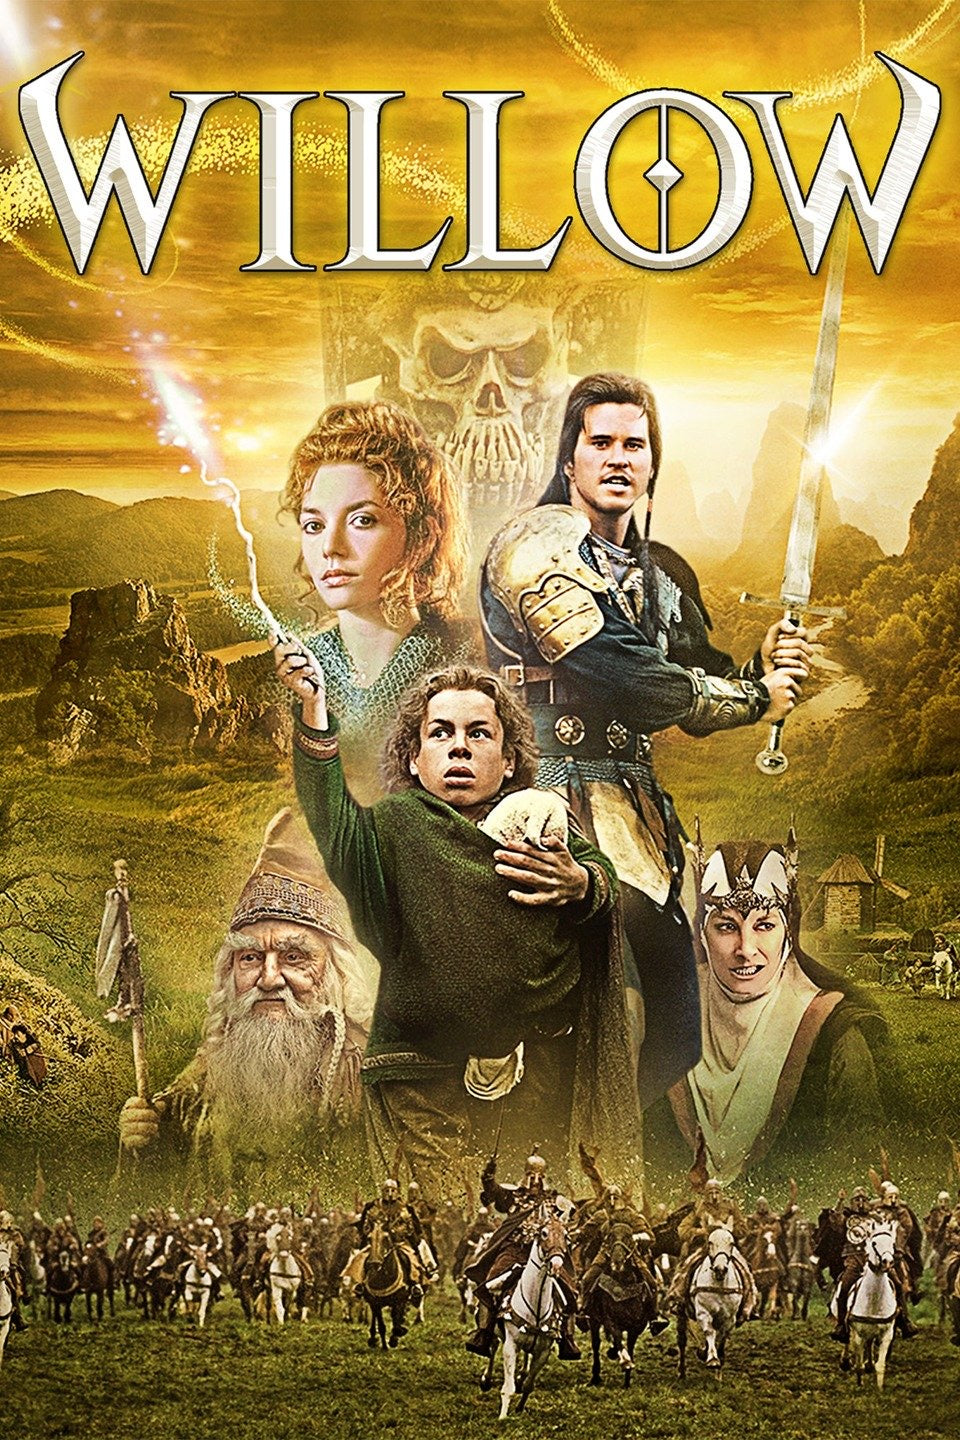 Willow (1988) Vudu or Movies Anywhere HD redemption only